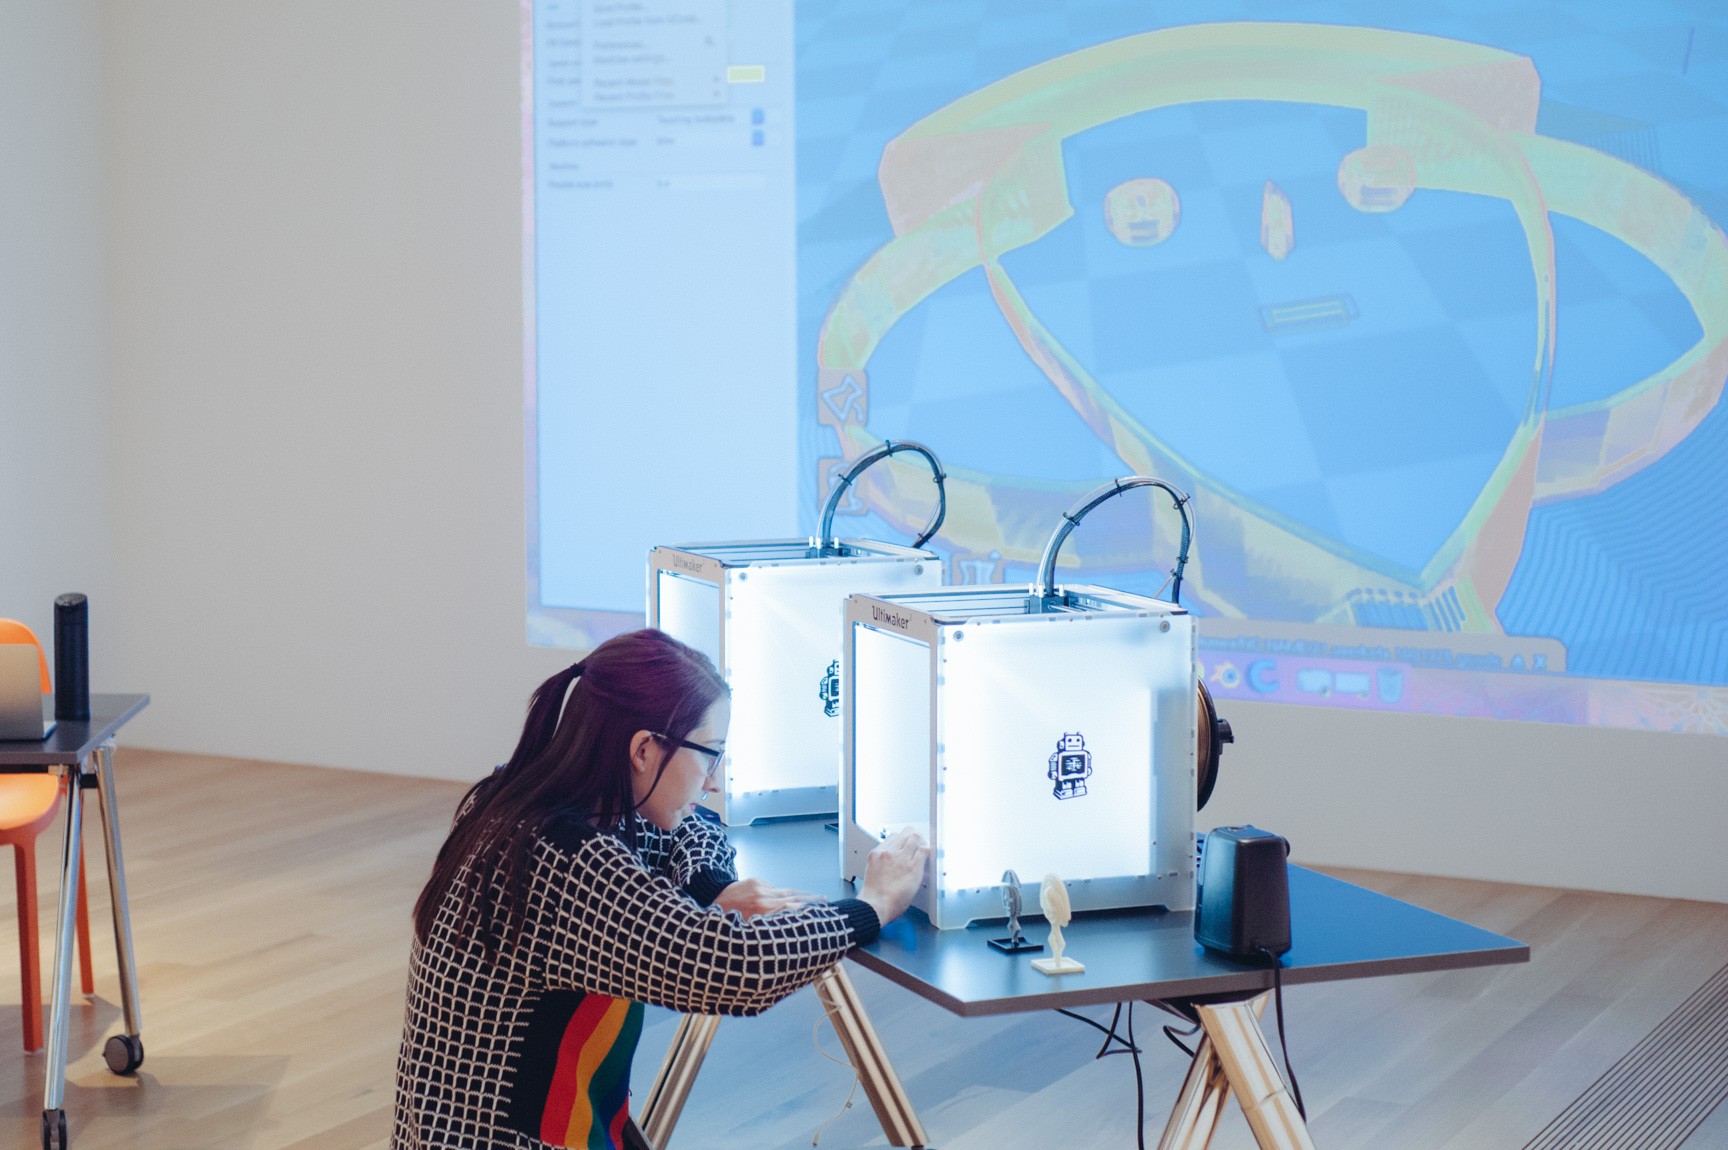 A participant interacts with one of the 3-D printers at the workshop.